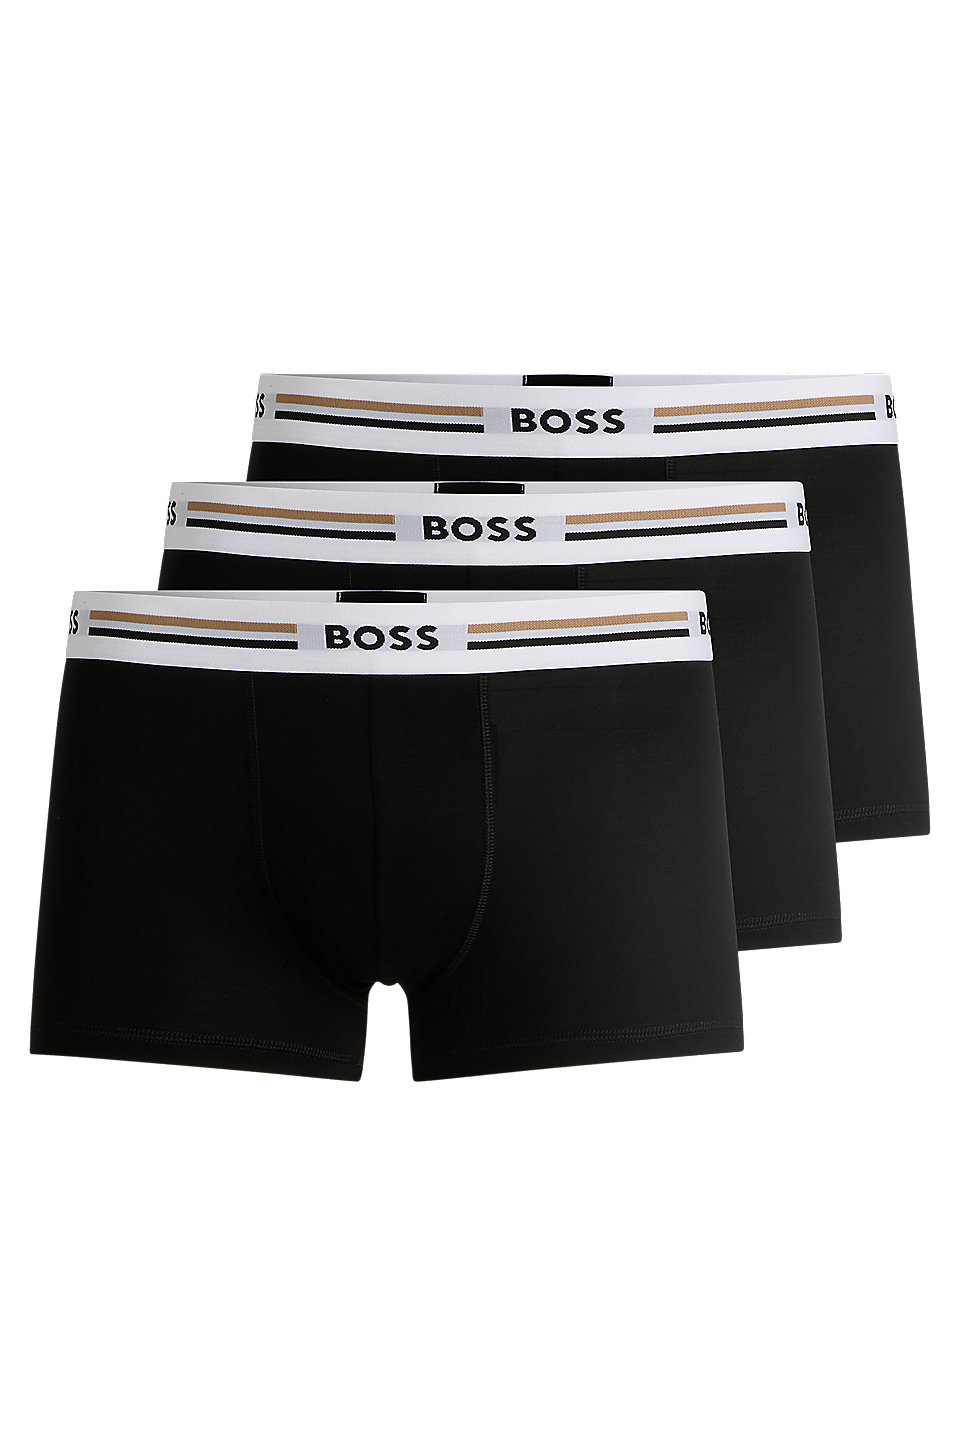 BOSS - Three-pack of soft-touch stretch trunks with logo waistbands